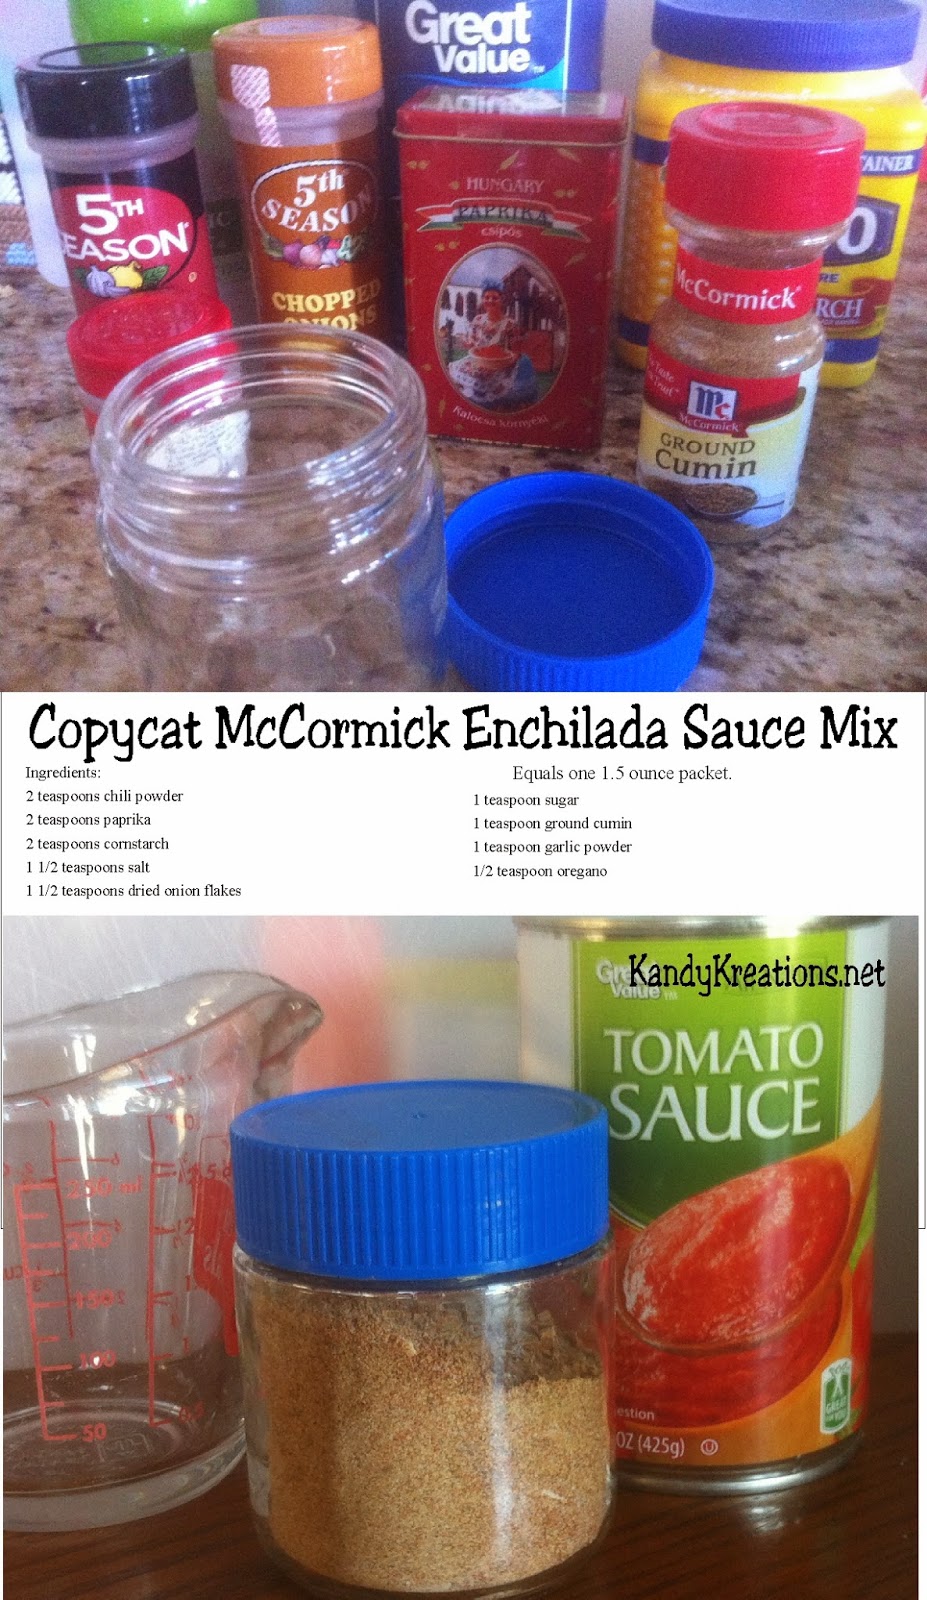 Save money and eat healthier with this copycat version of McCormick's Enchilada Sauce Mix.  Using items you probably already have in your kitchen, you can make a delicious enchilada sauce mix that saves a trip to the store.